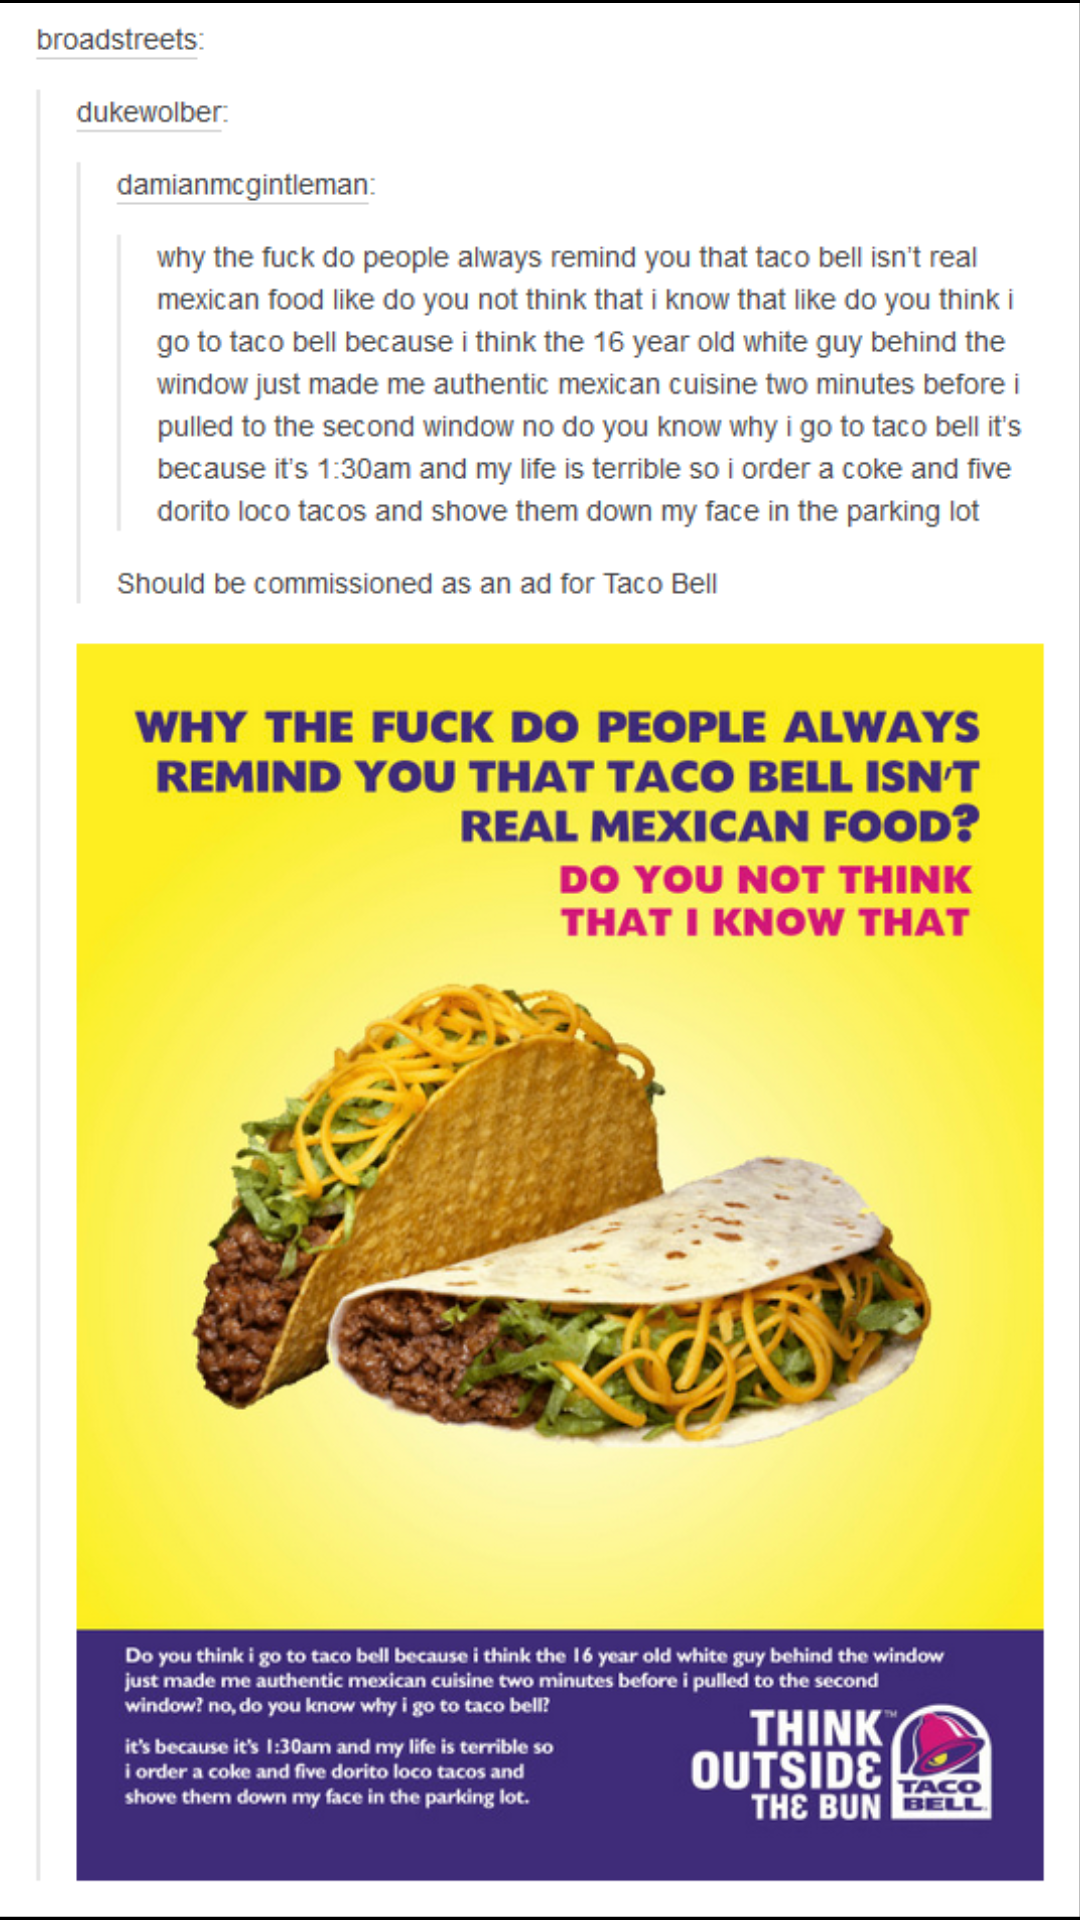 taco bell real mexican food - broadstreets dukter dansanmcgindeman why the rack do people always remind you that taco bet intreal medcan food do you not think that I know that do you think go to taco bell because think the 16 year old white guy behind the